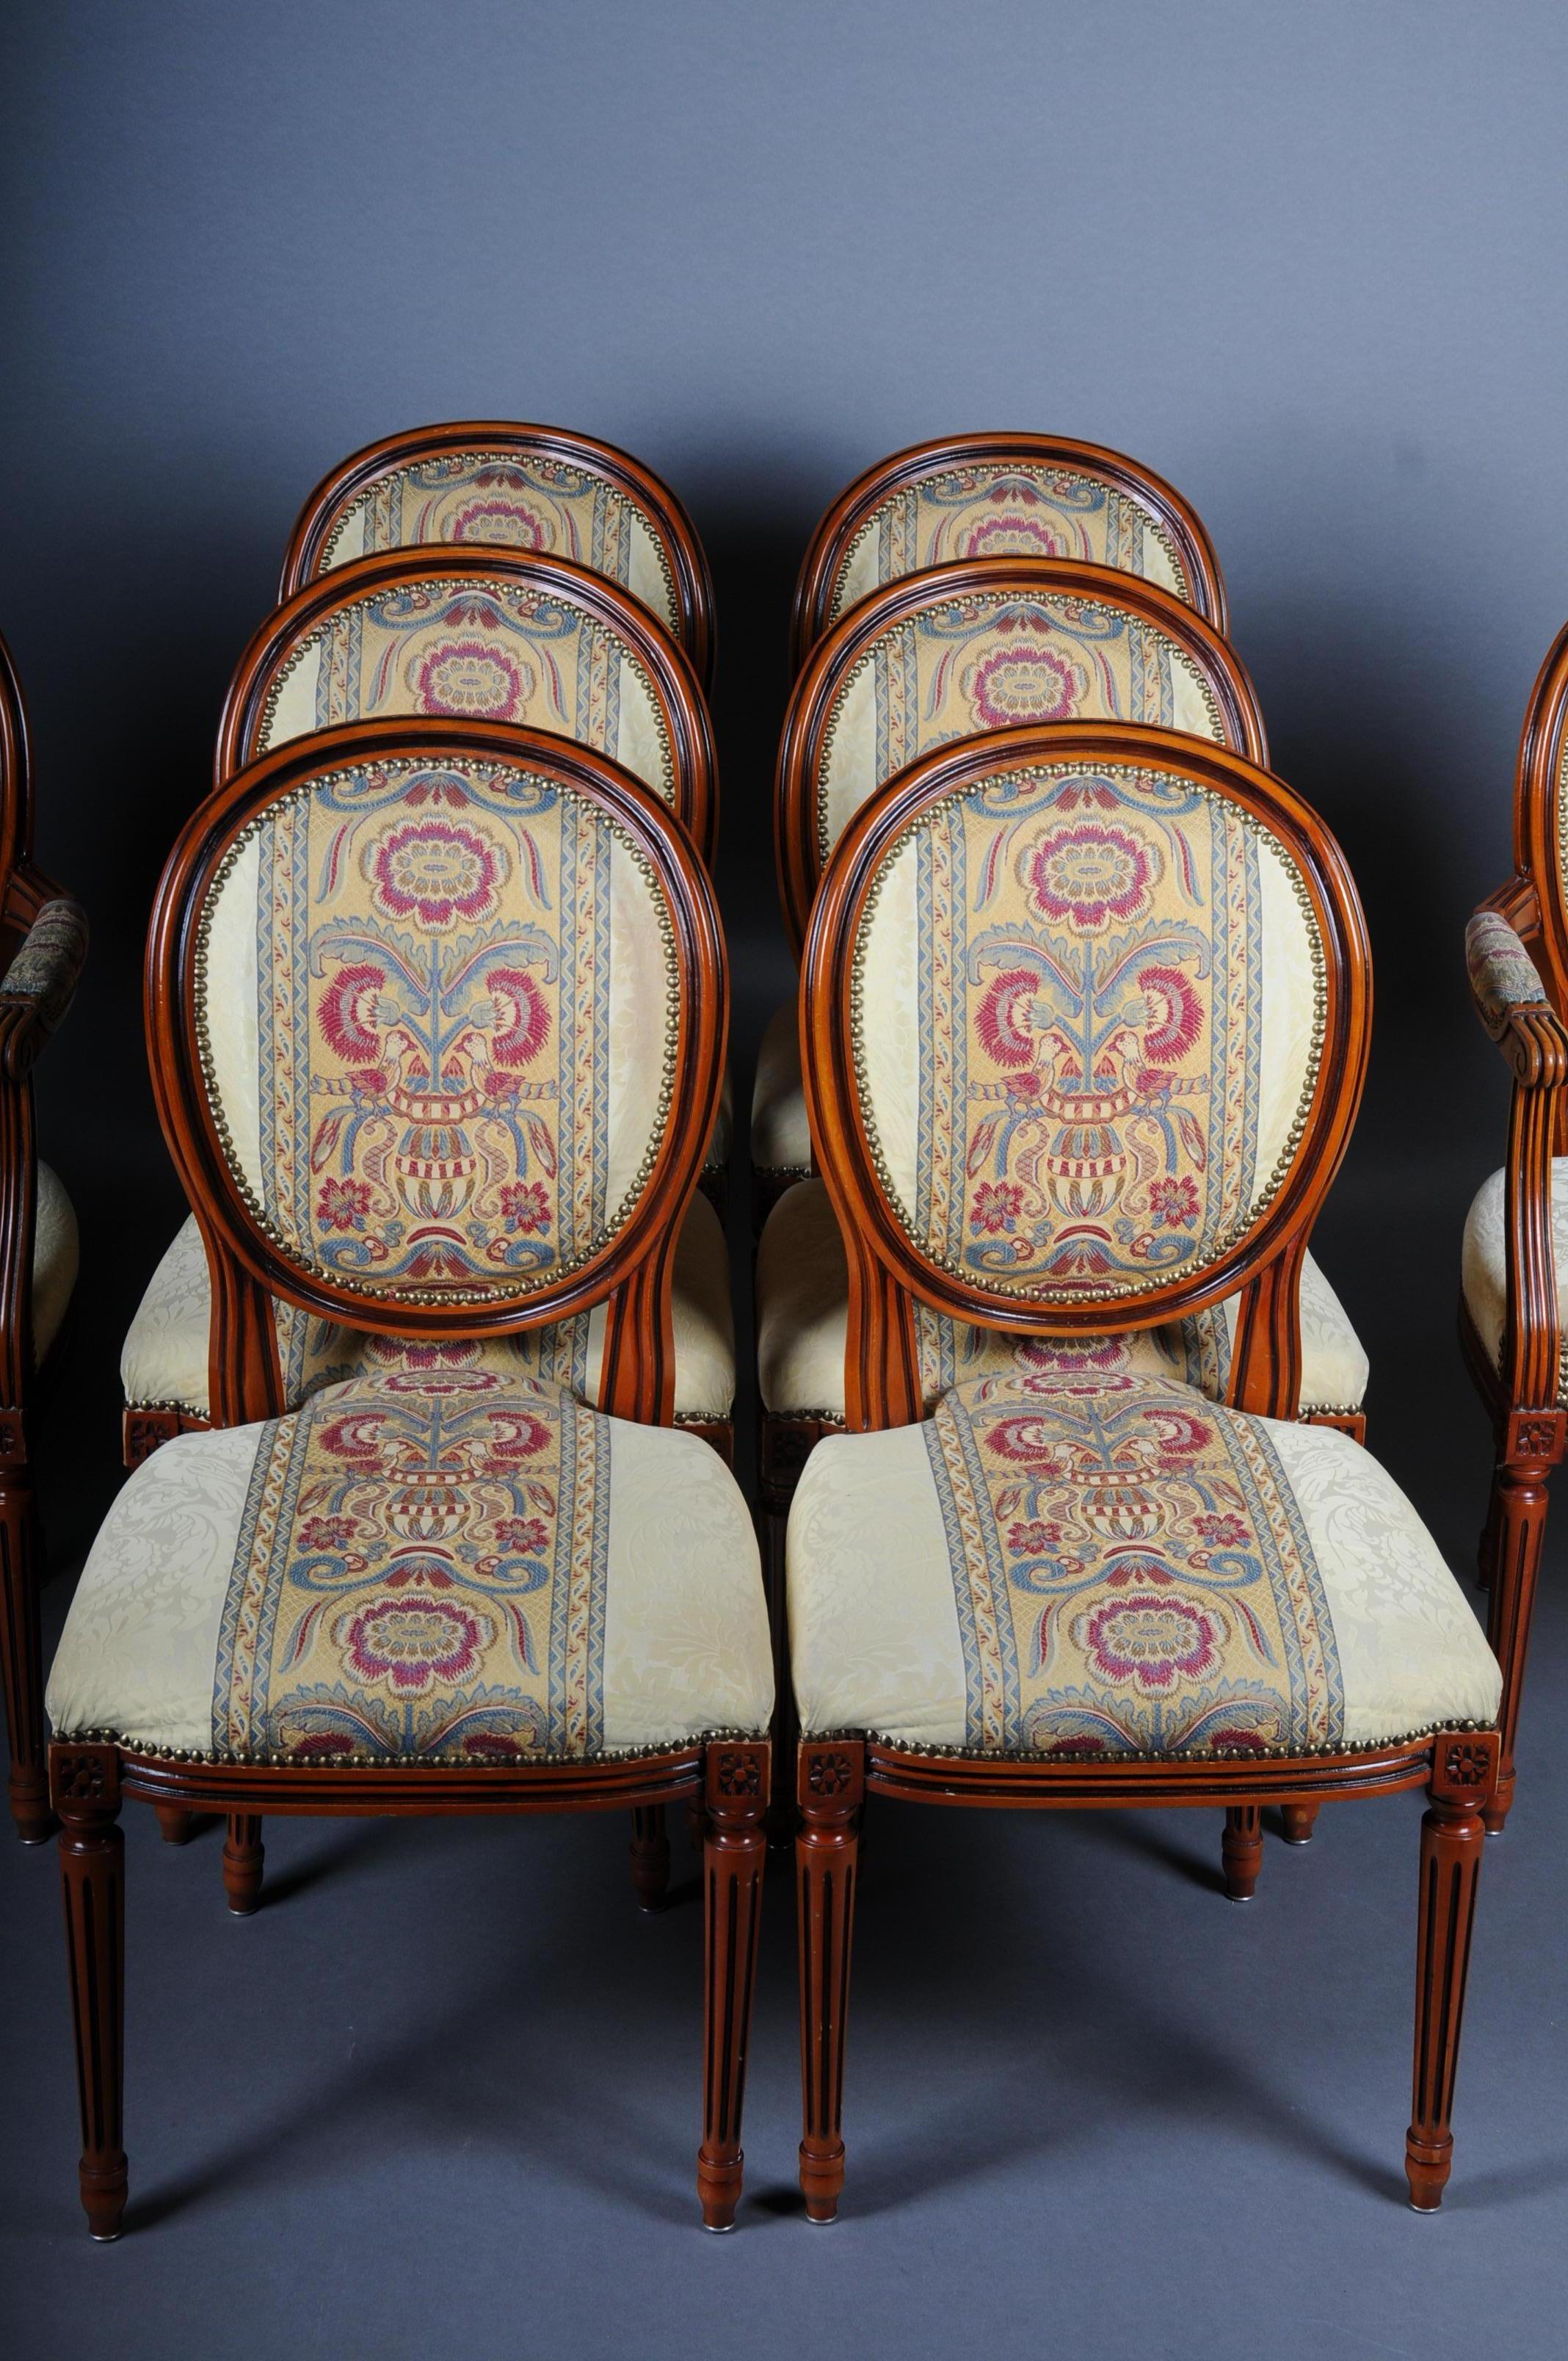 8 French drawing room chairs Louis XVI

Solid wood, high oval, profiled back framing. The seat is processed with a classic upholstery.
The ensemble consists of 6 chairs and 2 armchairs.
You can find the right dining table / conference table in